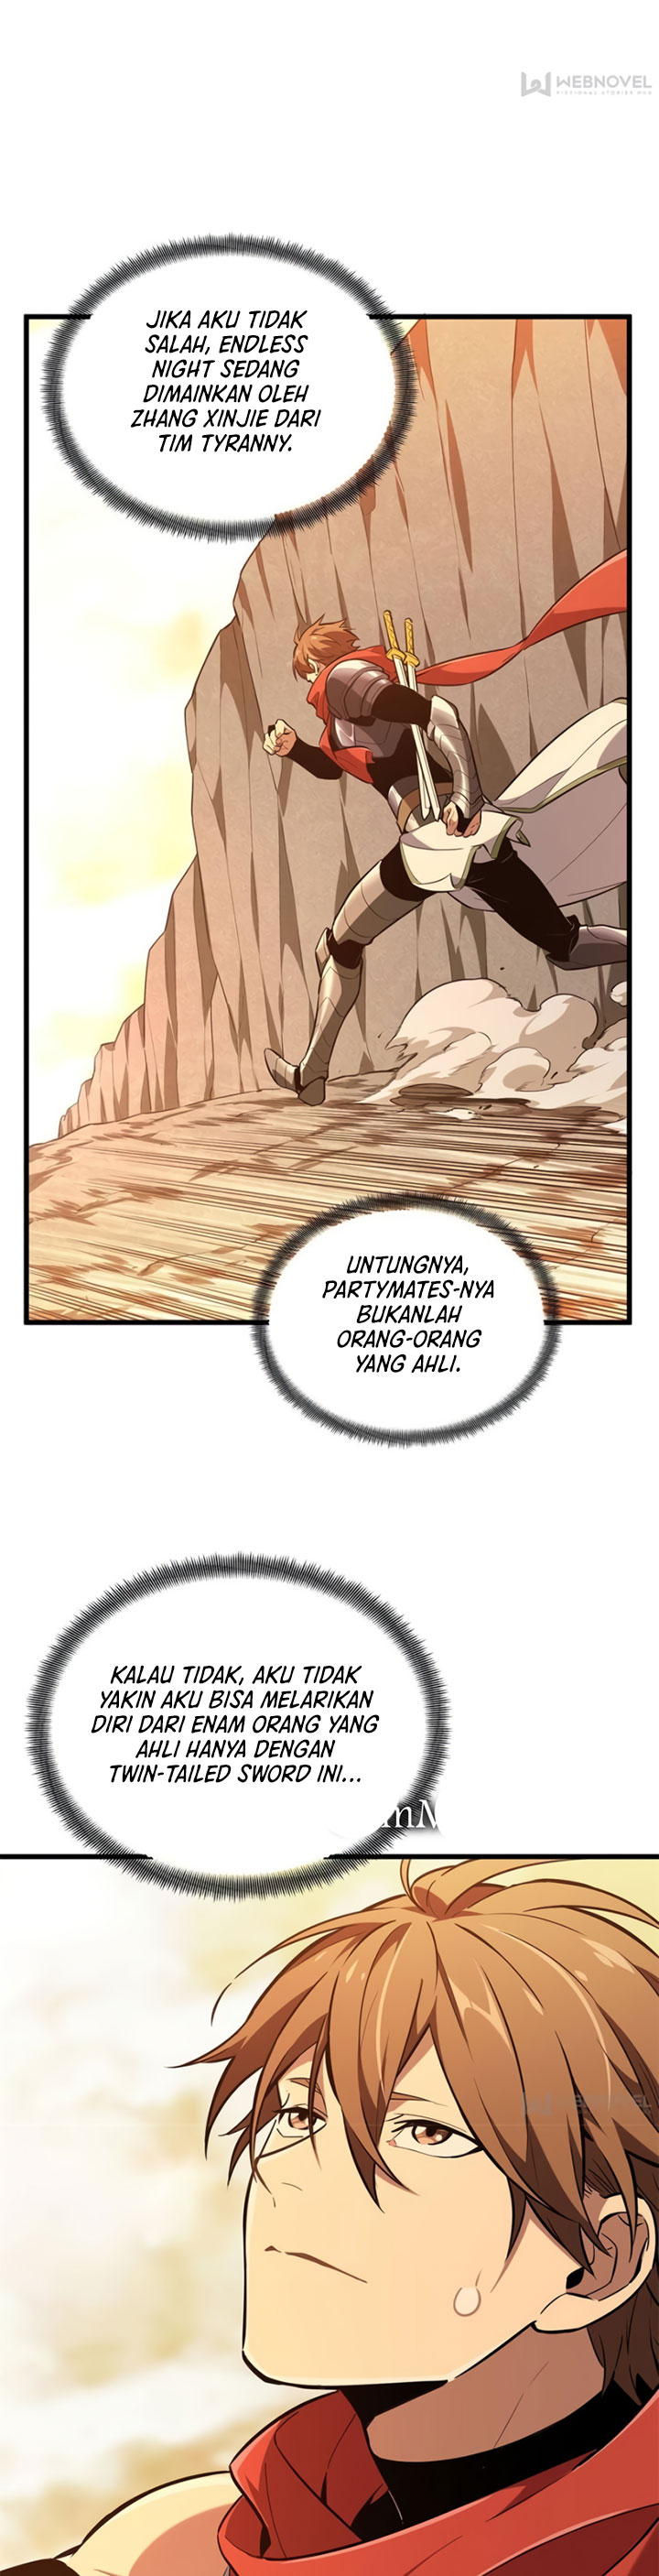 The King’s Avatar (2020) Chapter 100